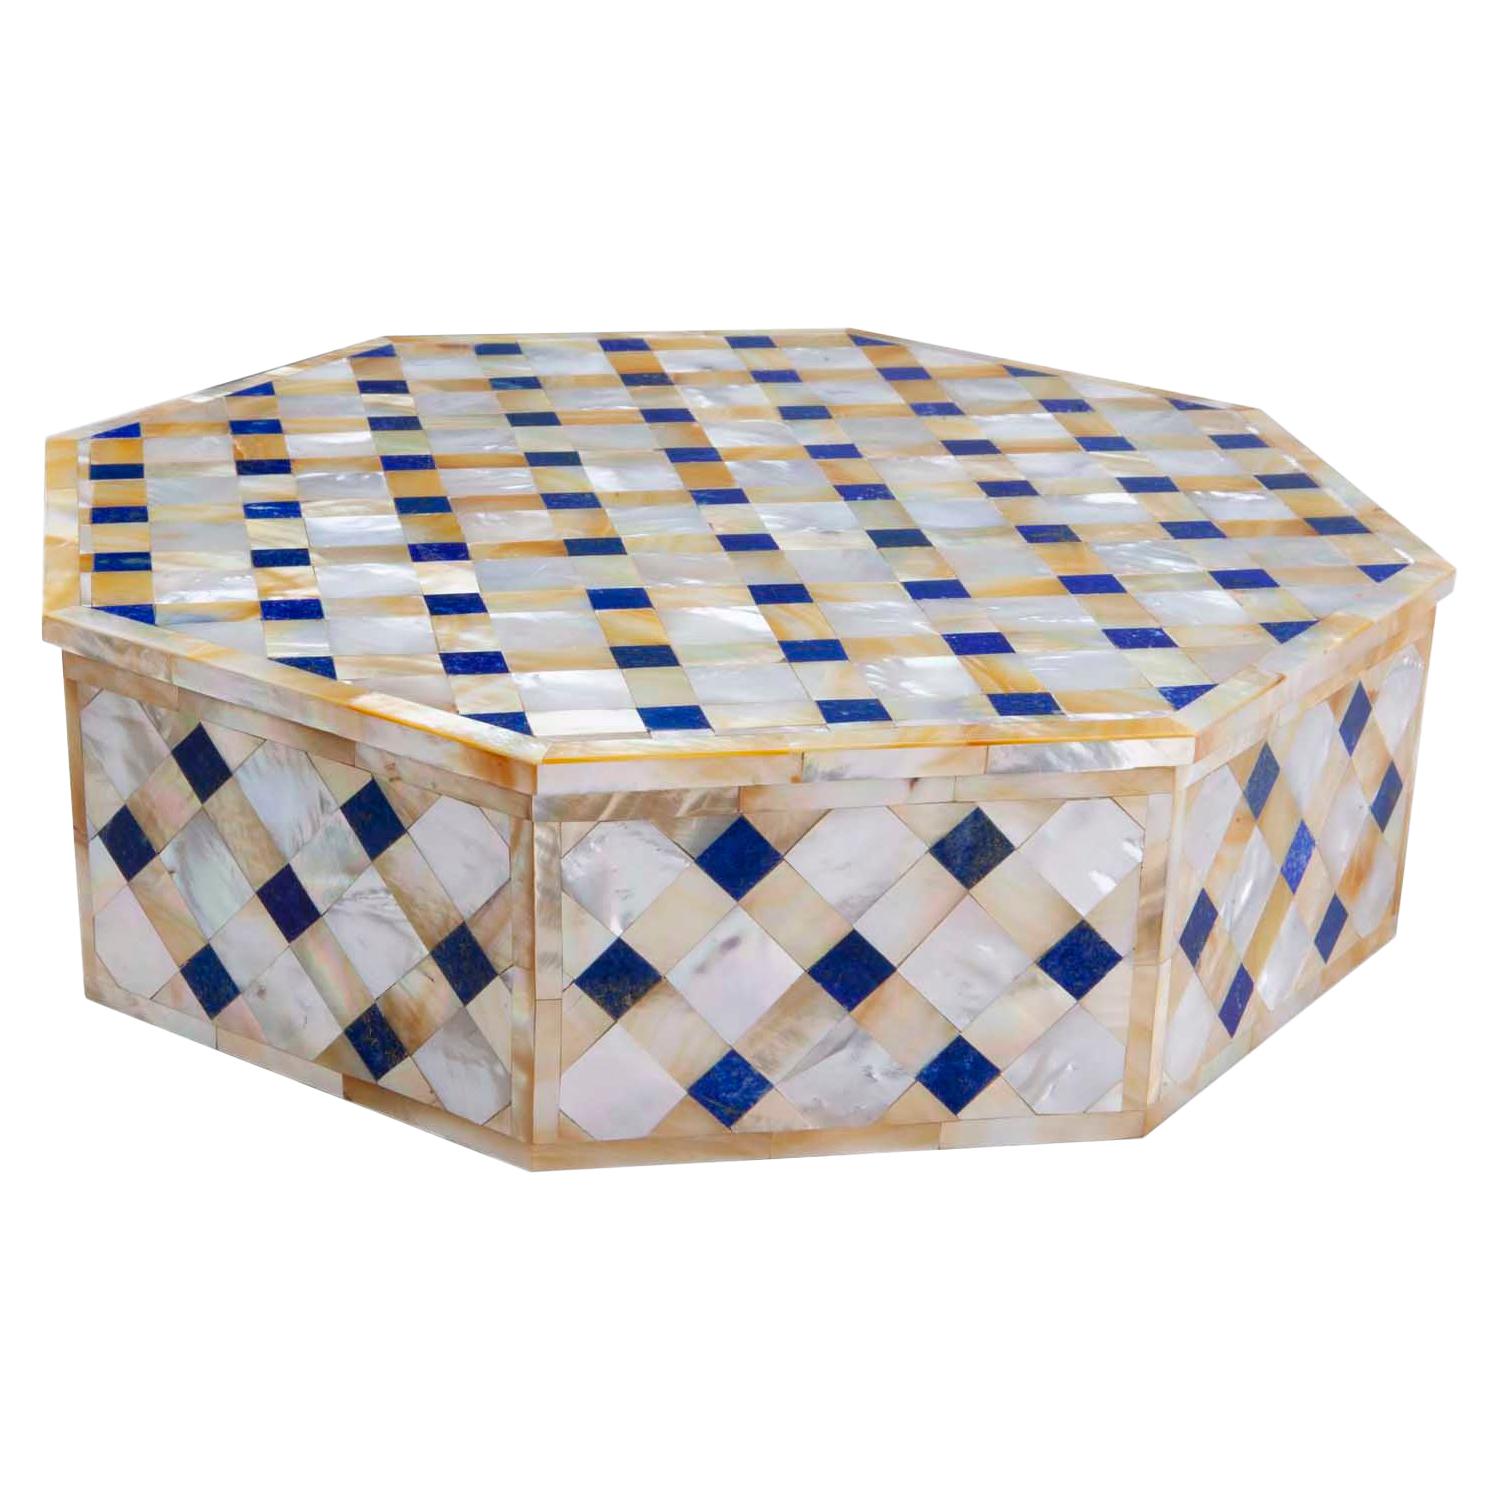 Makrana Marble Box from Agra India Inlaid with Lapis and Abablone